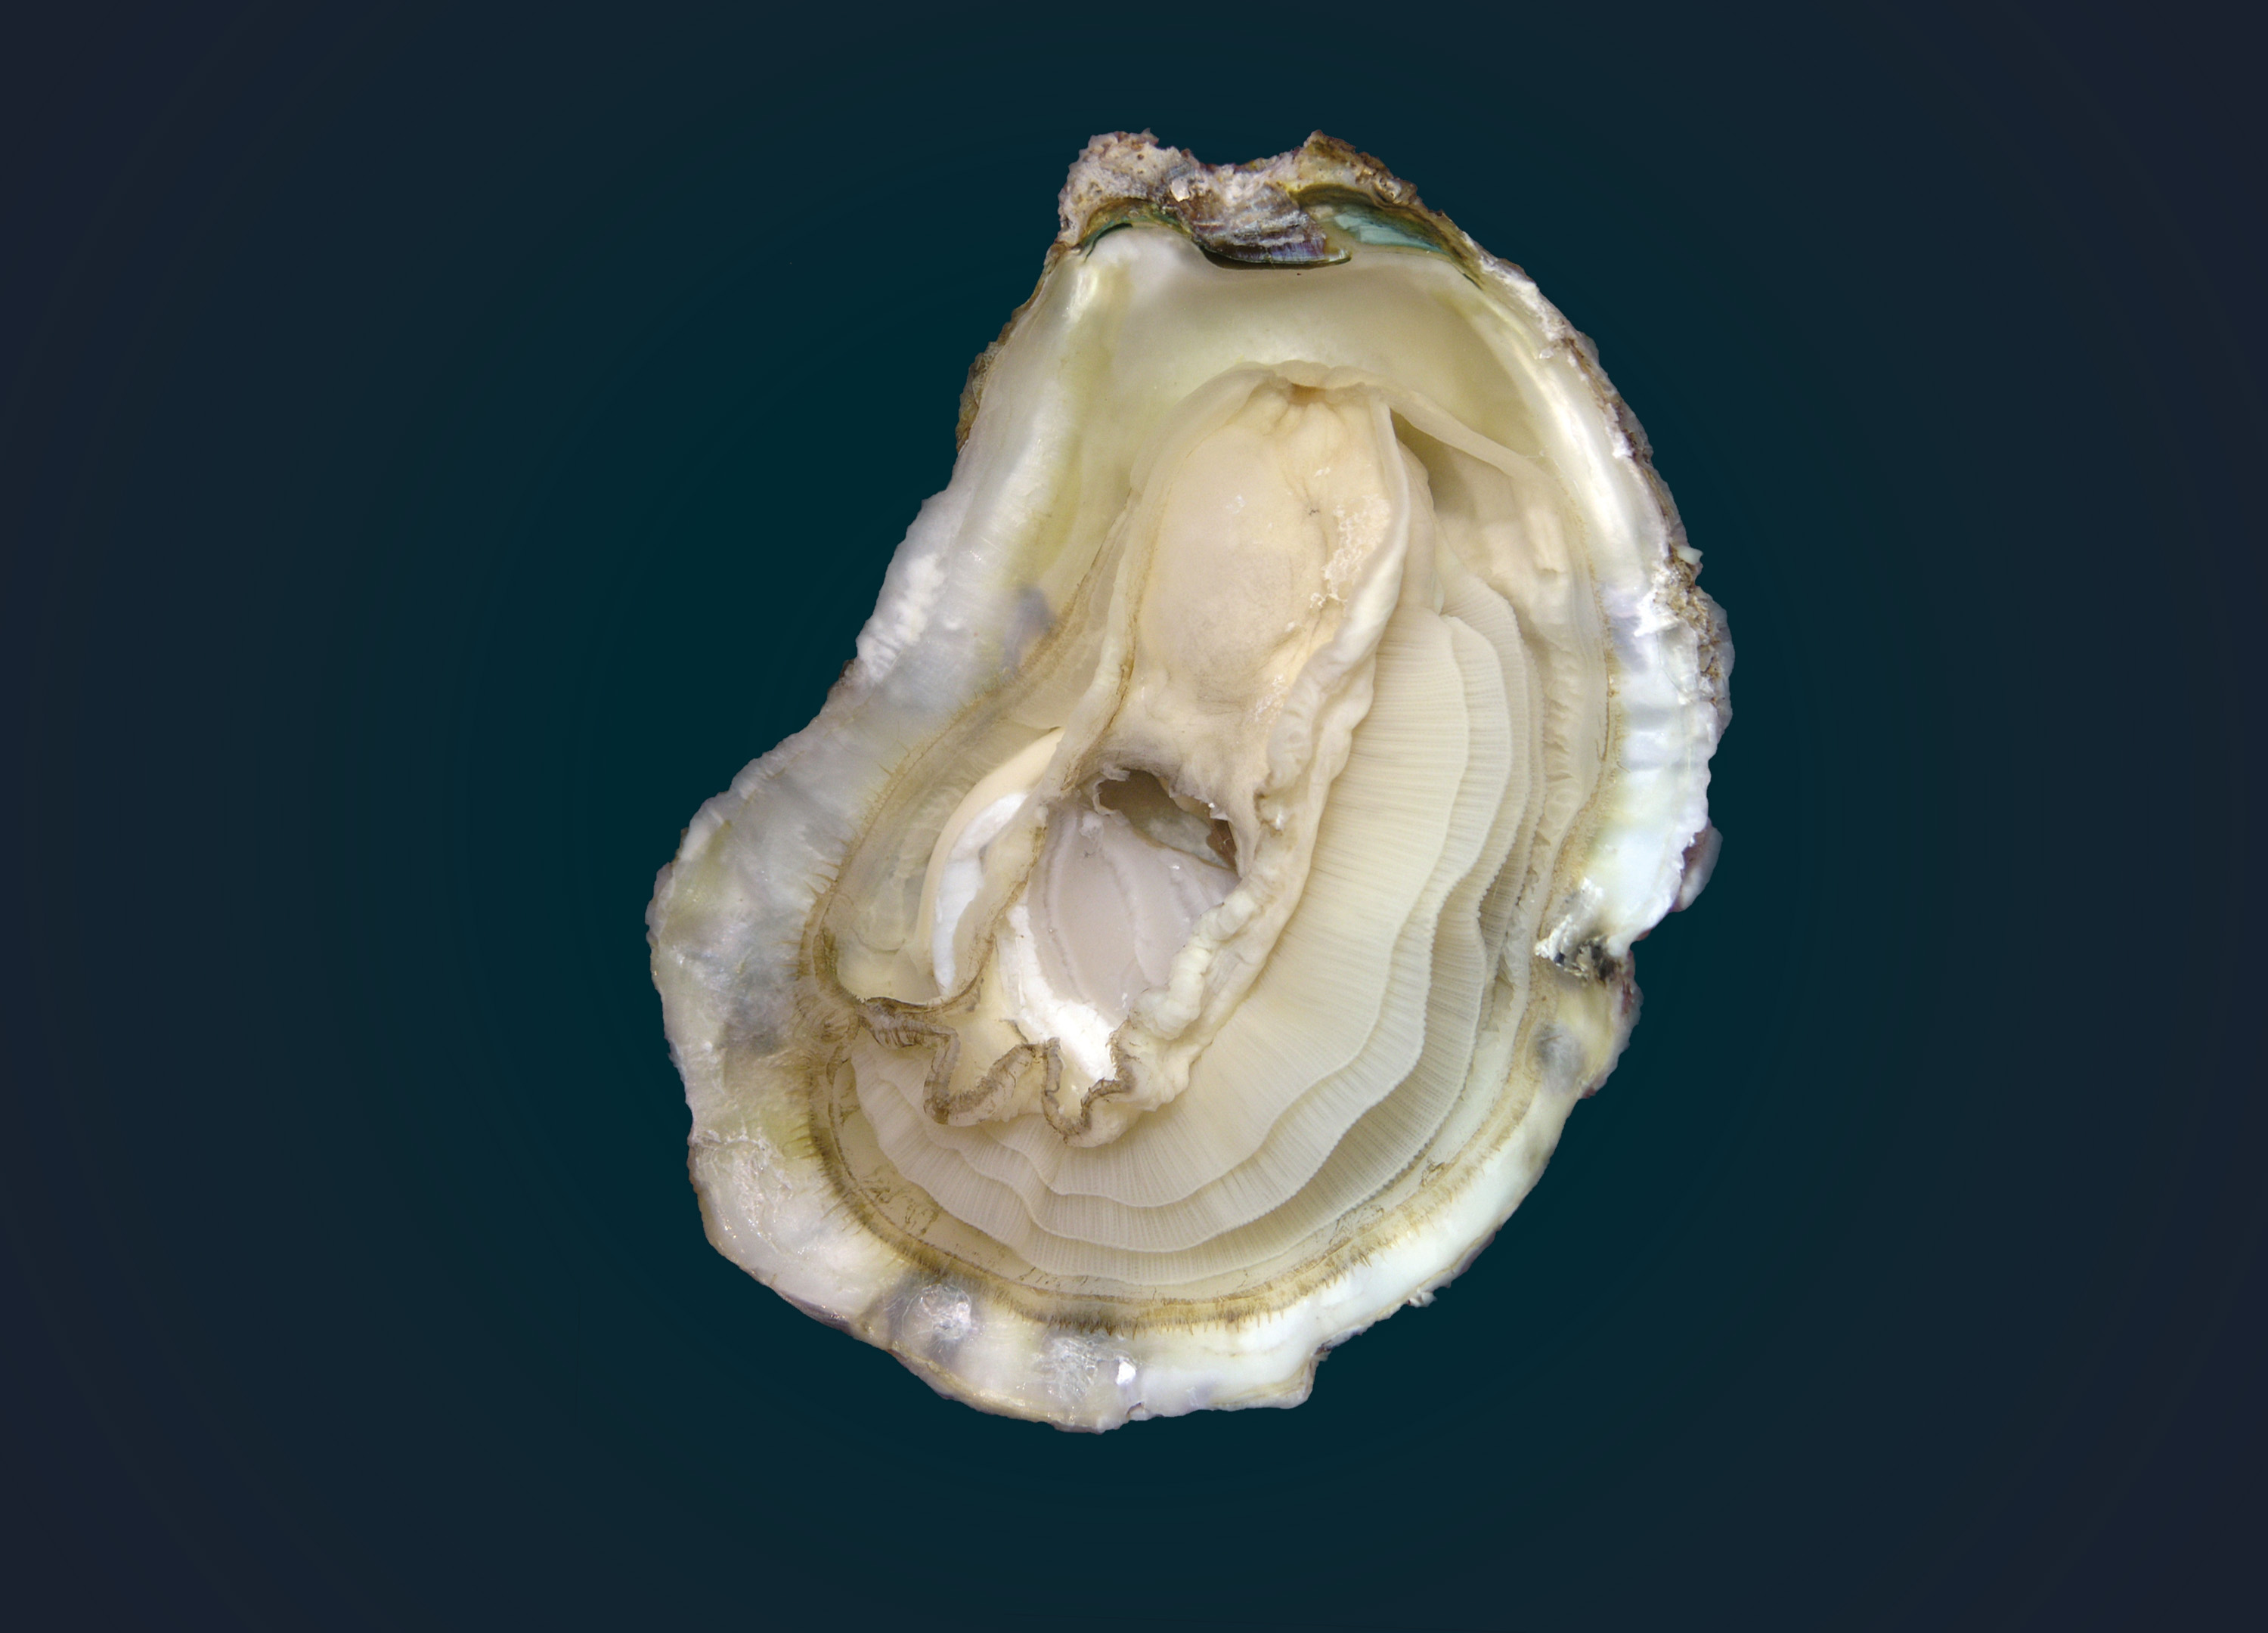 Oyster on the half shell, showing internal anatomy of oyster